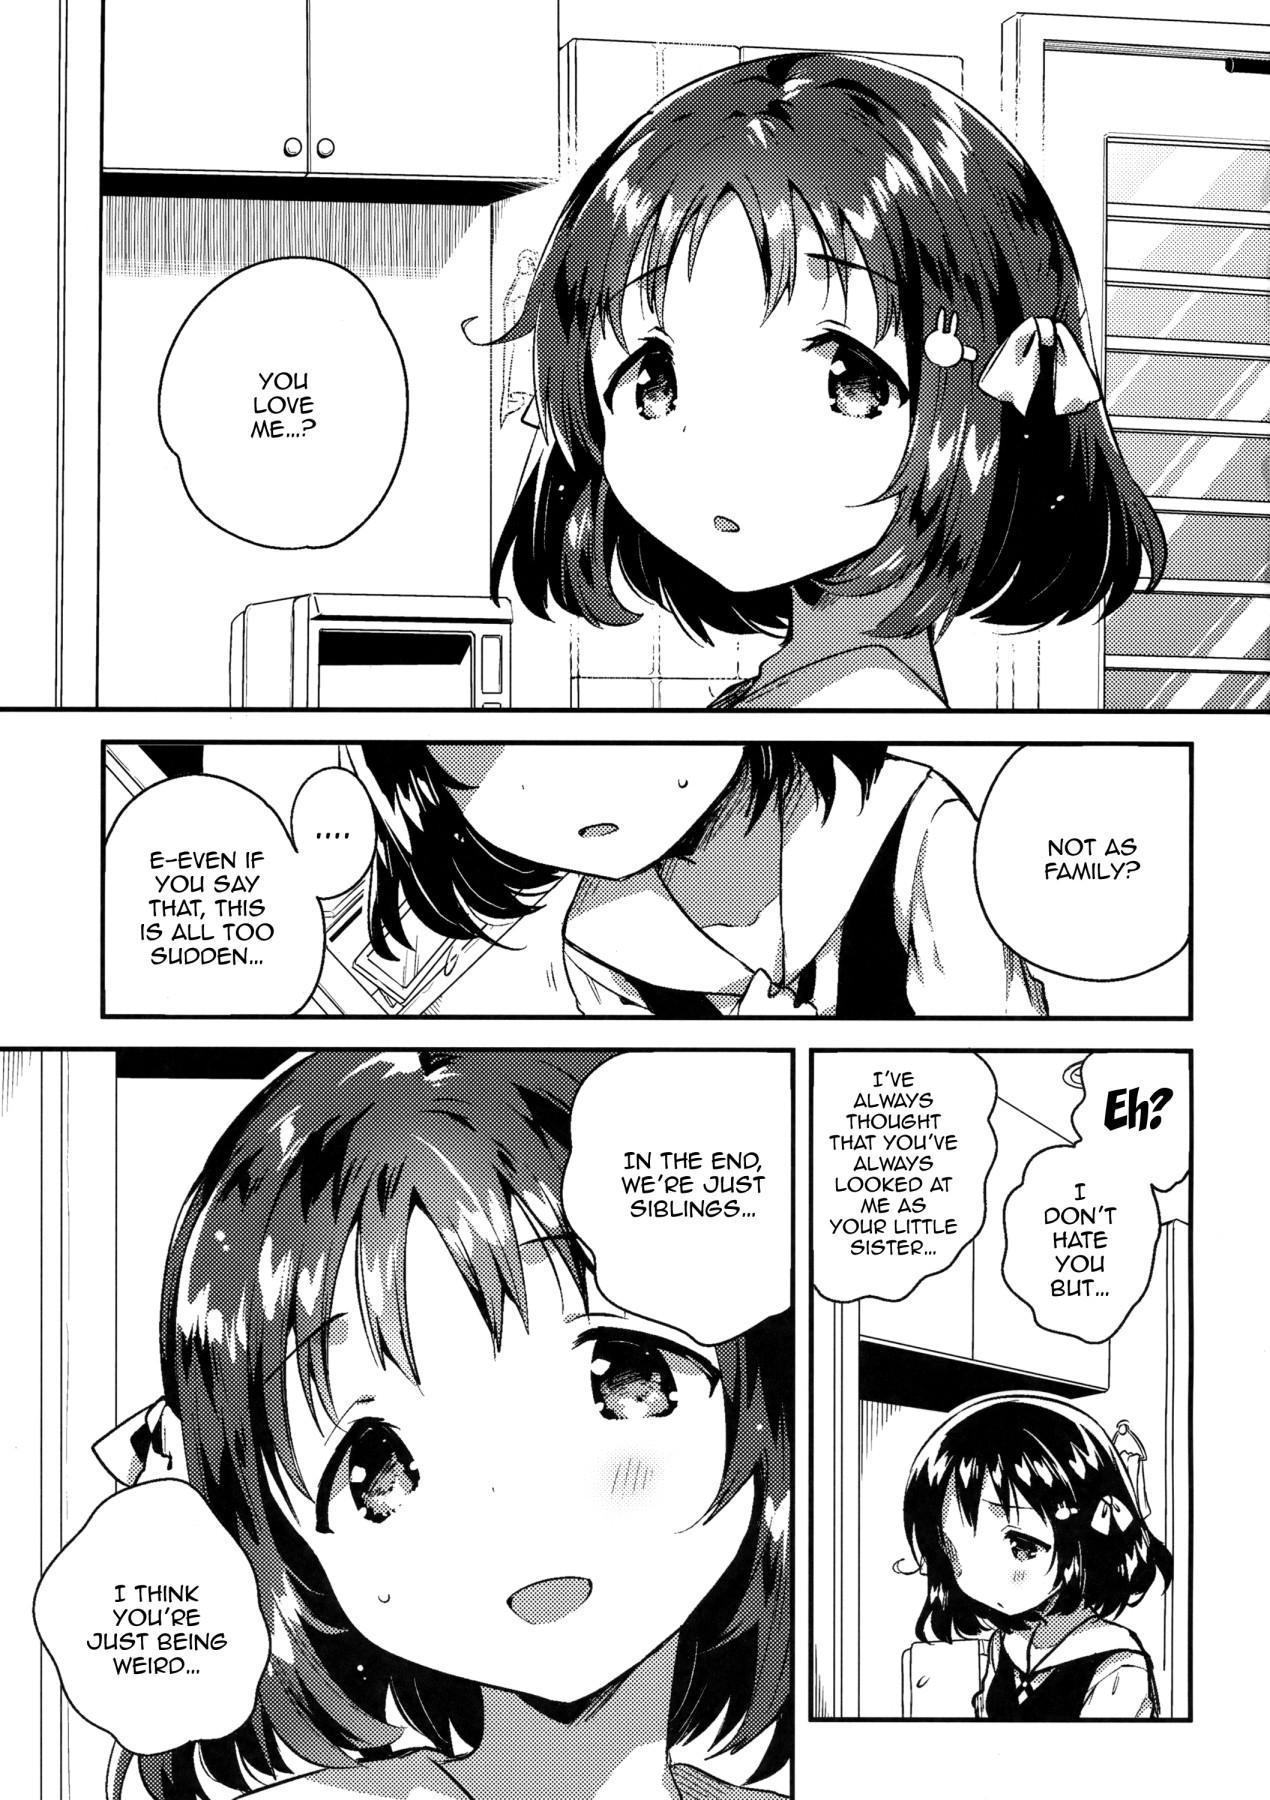 Picked Up Imouto wa Boku o Futta - My sister ditched me - Original Real Amateur - Page 2